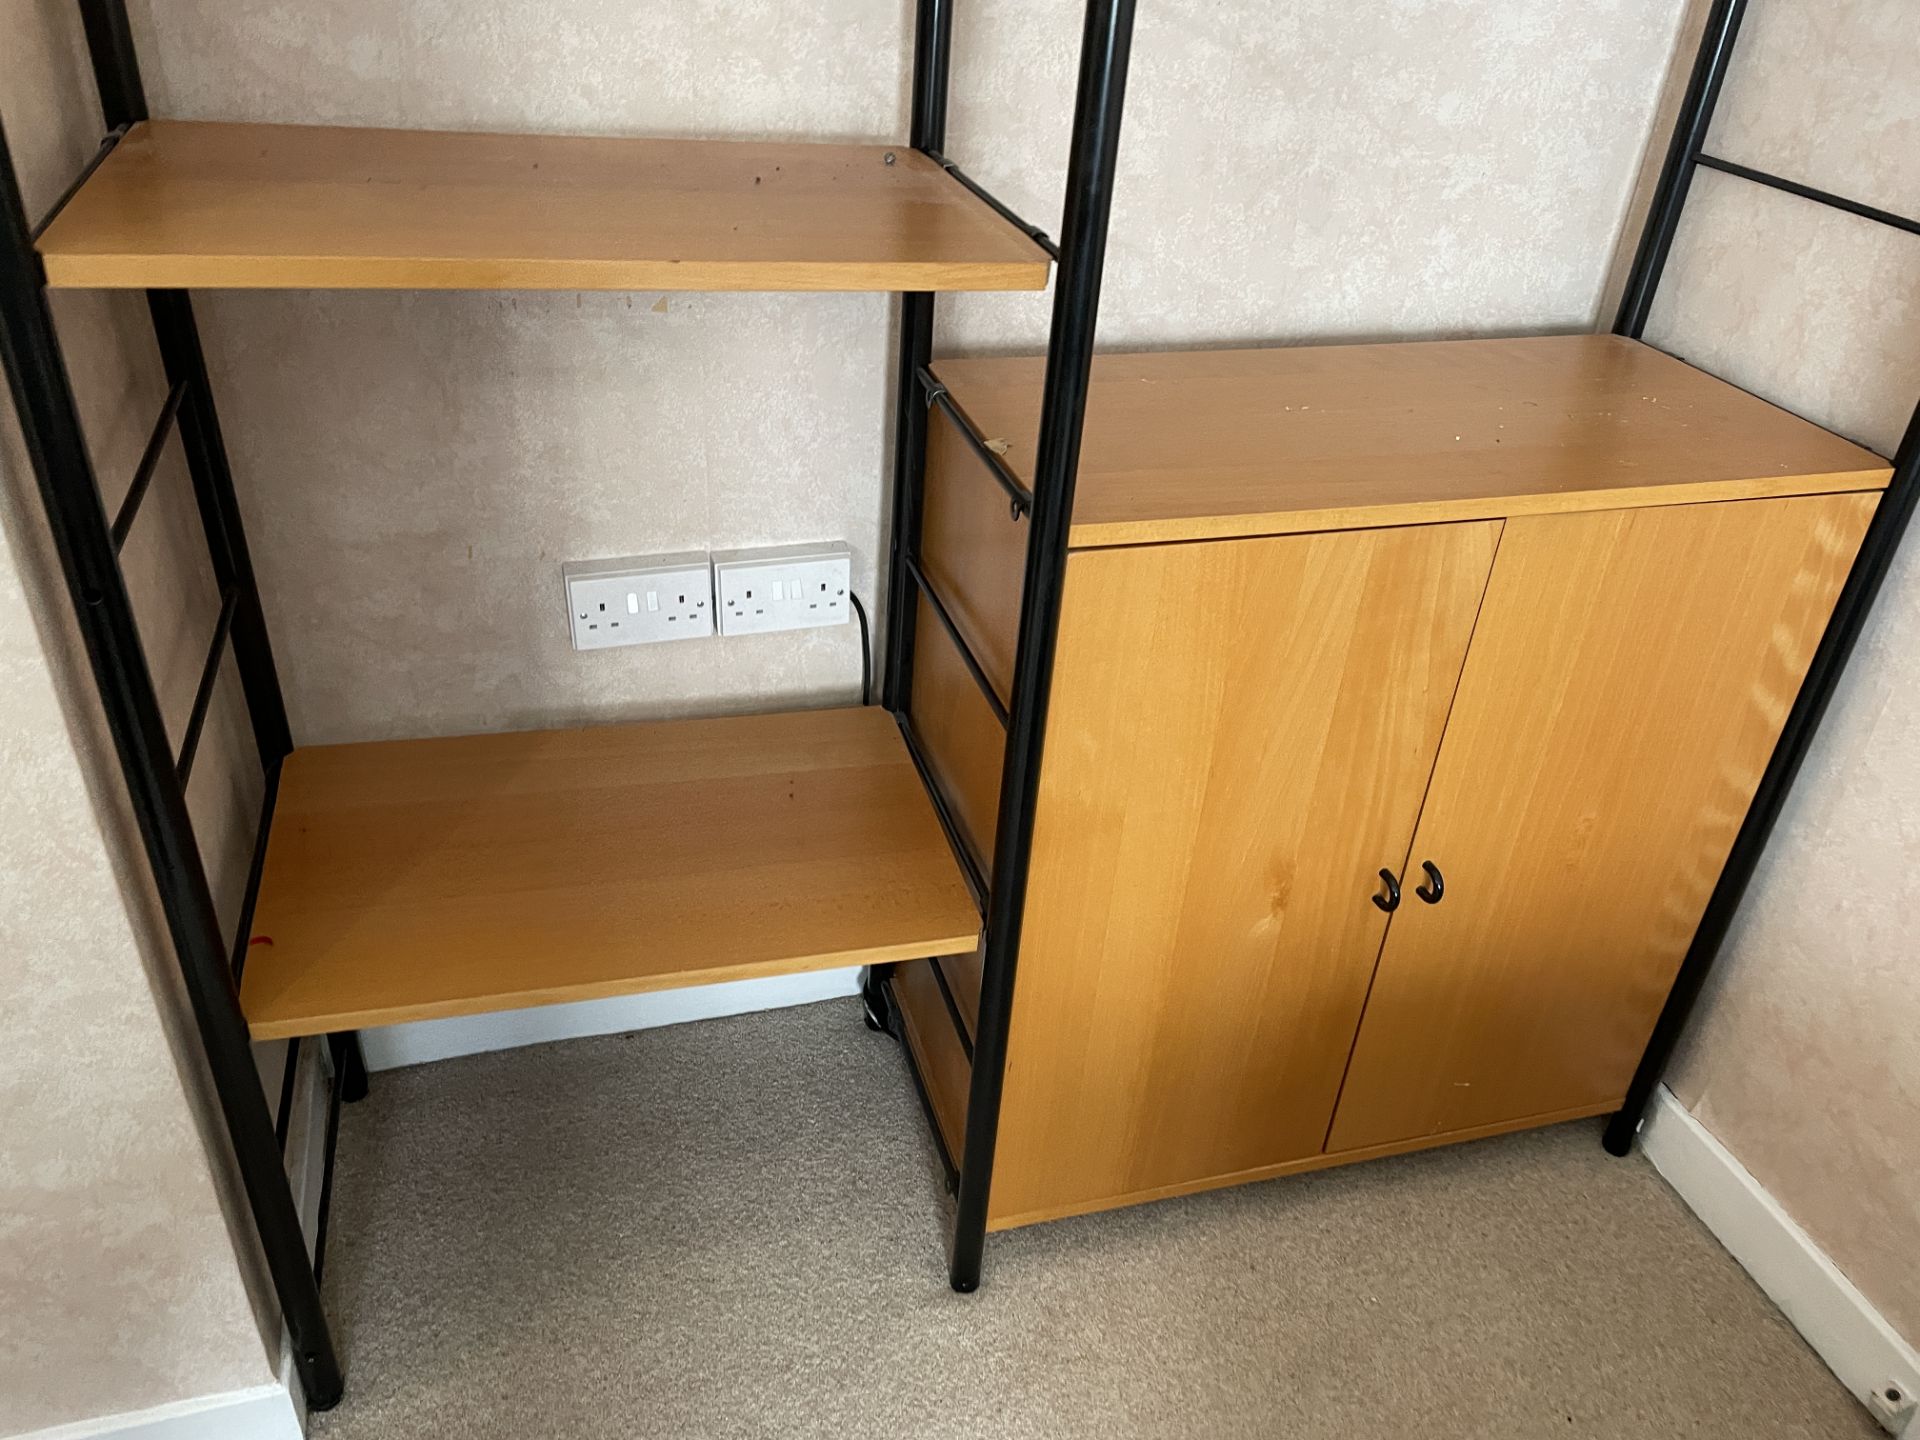 2 x Stylish Ladex-style Furniture Units - From An Exclusive Property In Leeds - No VAT on the Hammer - Image 2 of 18